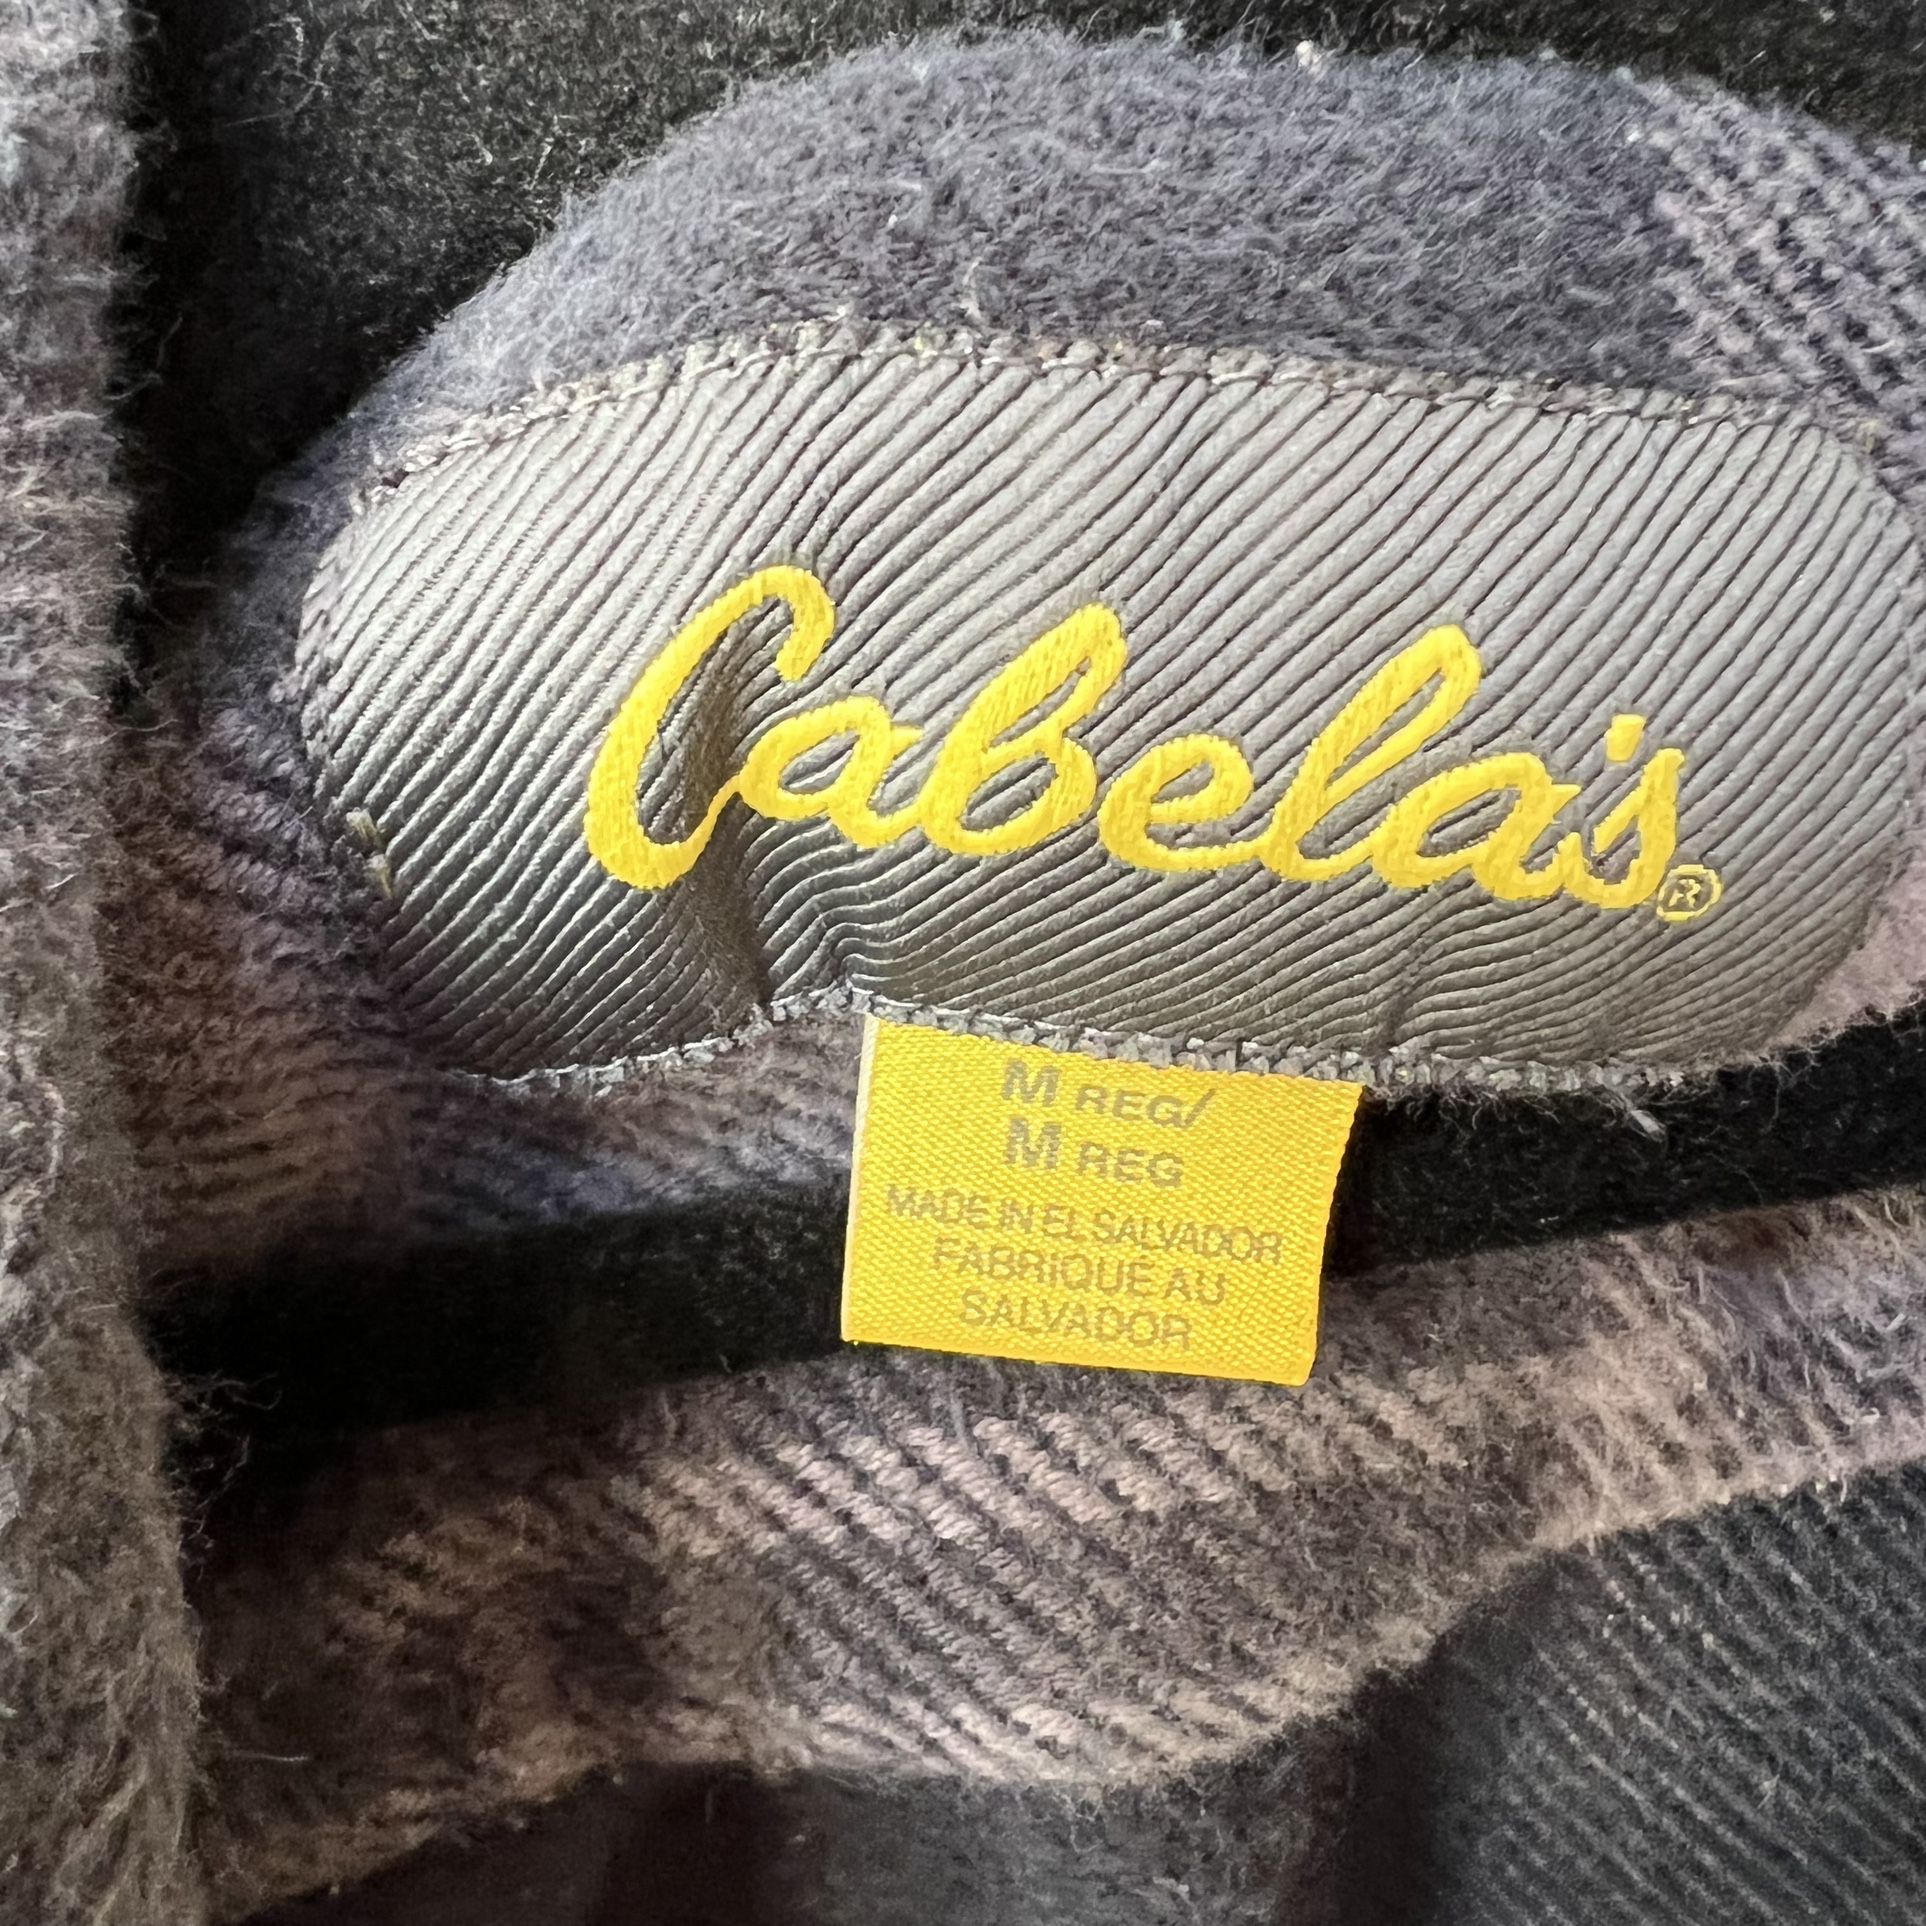 Cabela's Flannel Long Sleeve Shirt For Ladies